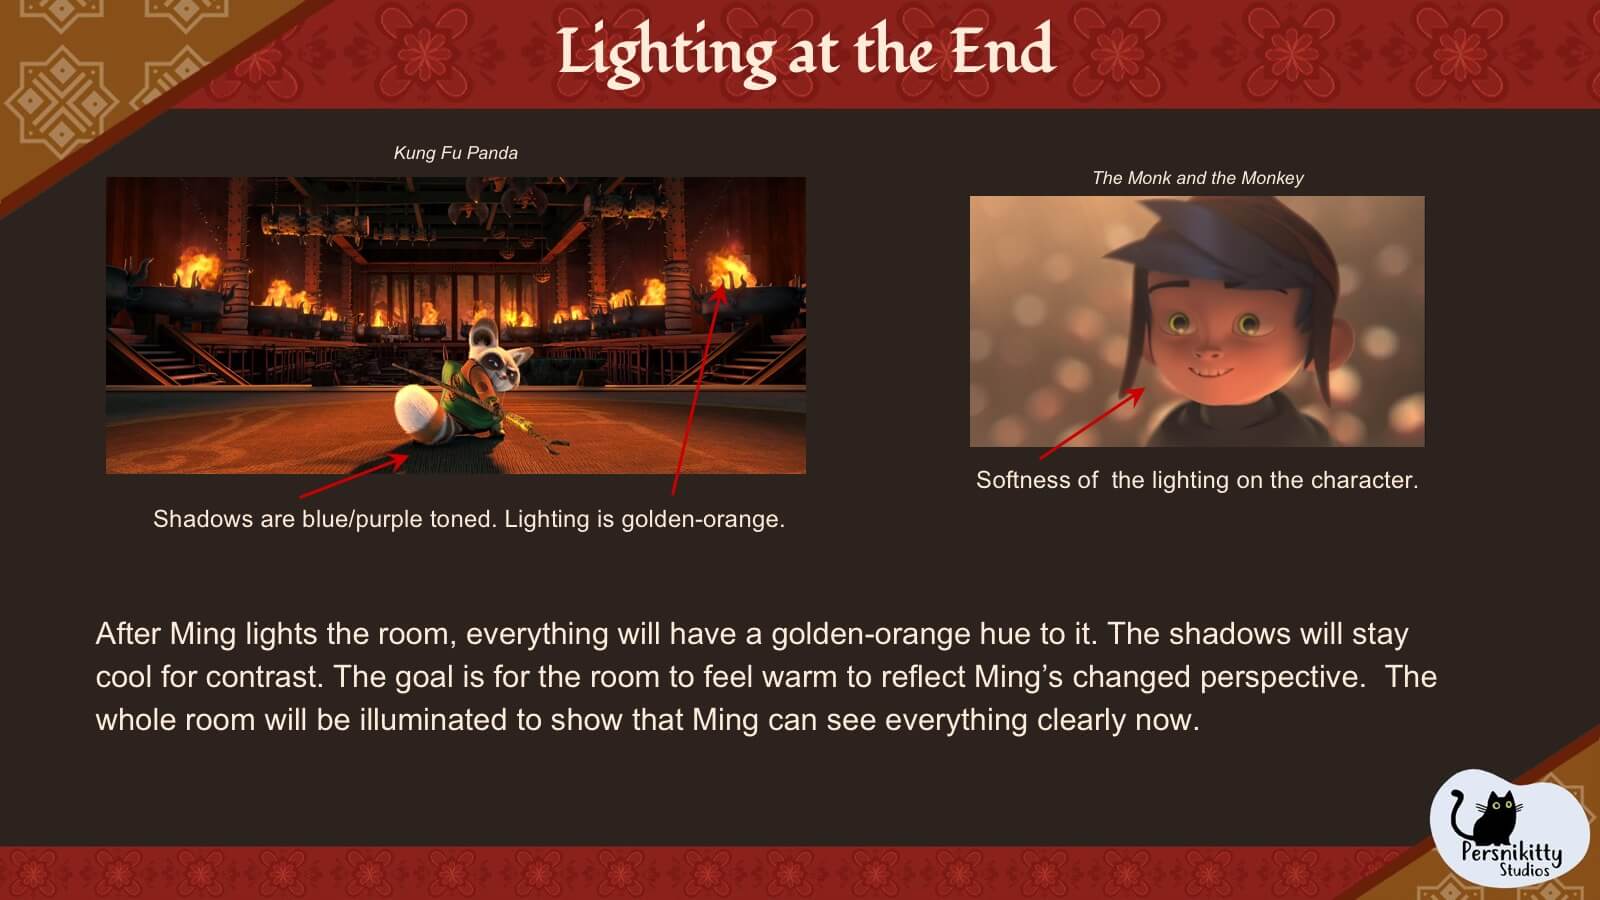 A slide displaying the visual references for lighting in the temple at the end of the film. 